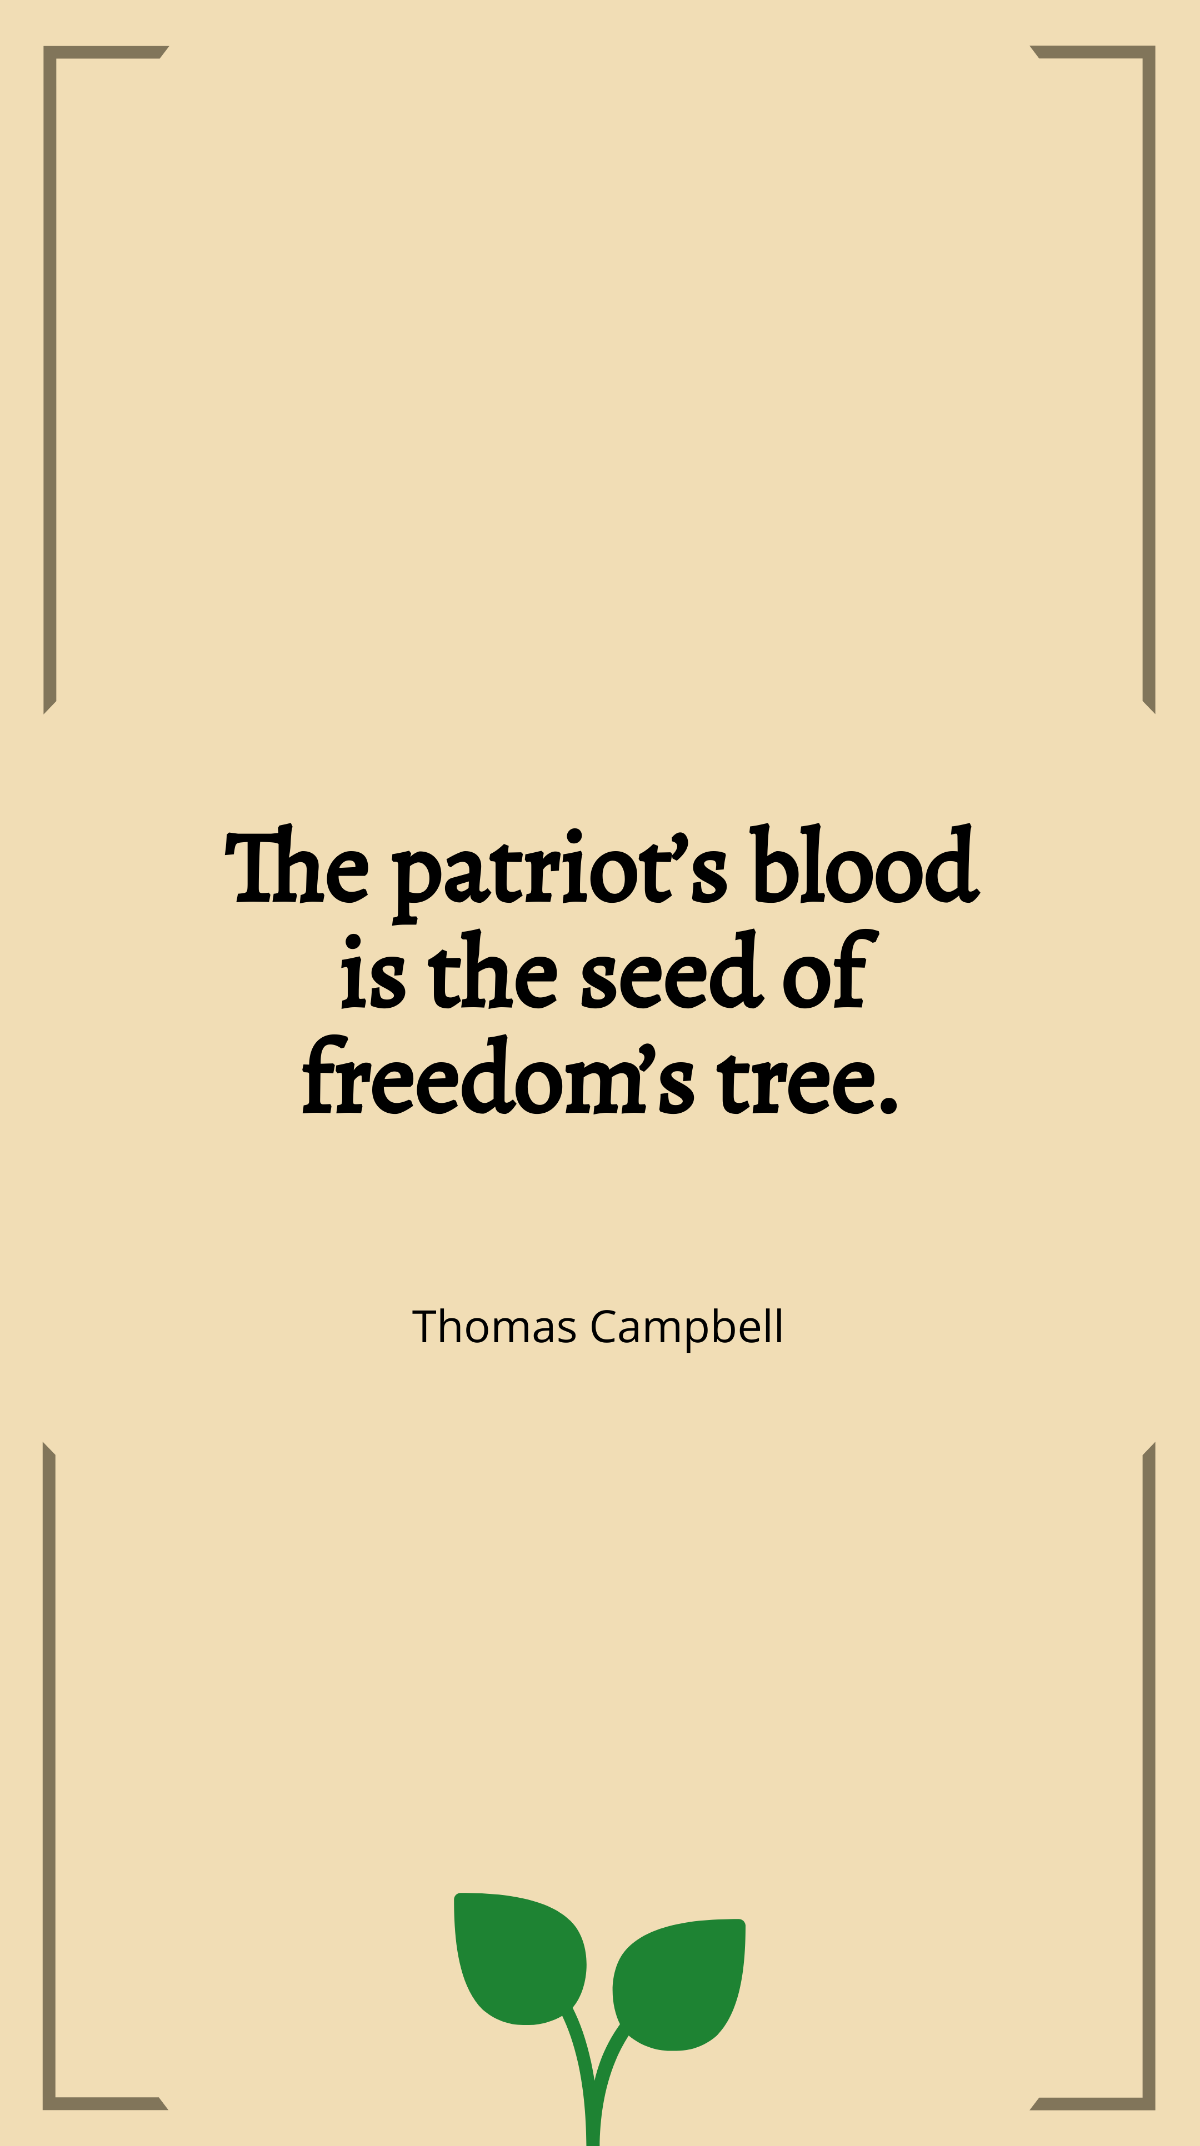 Thomas Campbell - “The patriot’s blood is the seed of freedom’s tree.”